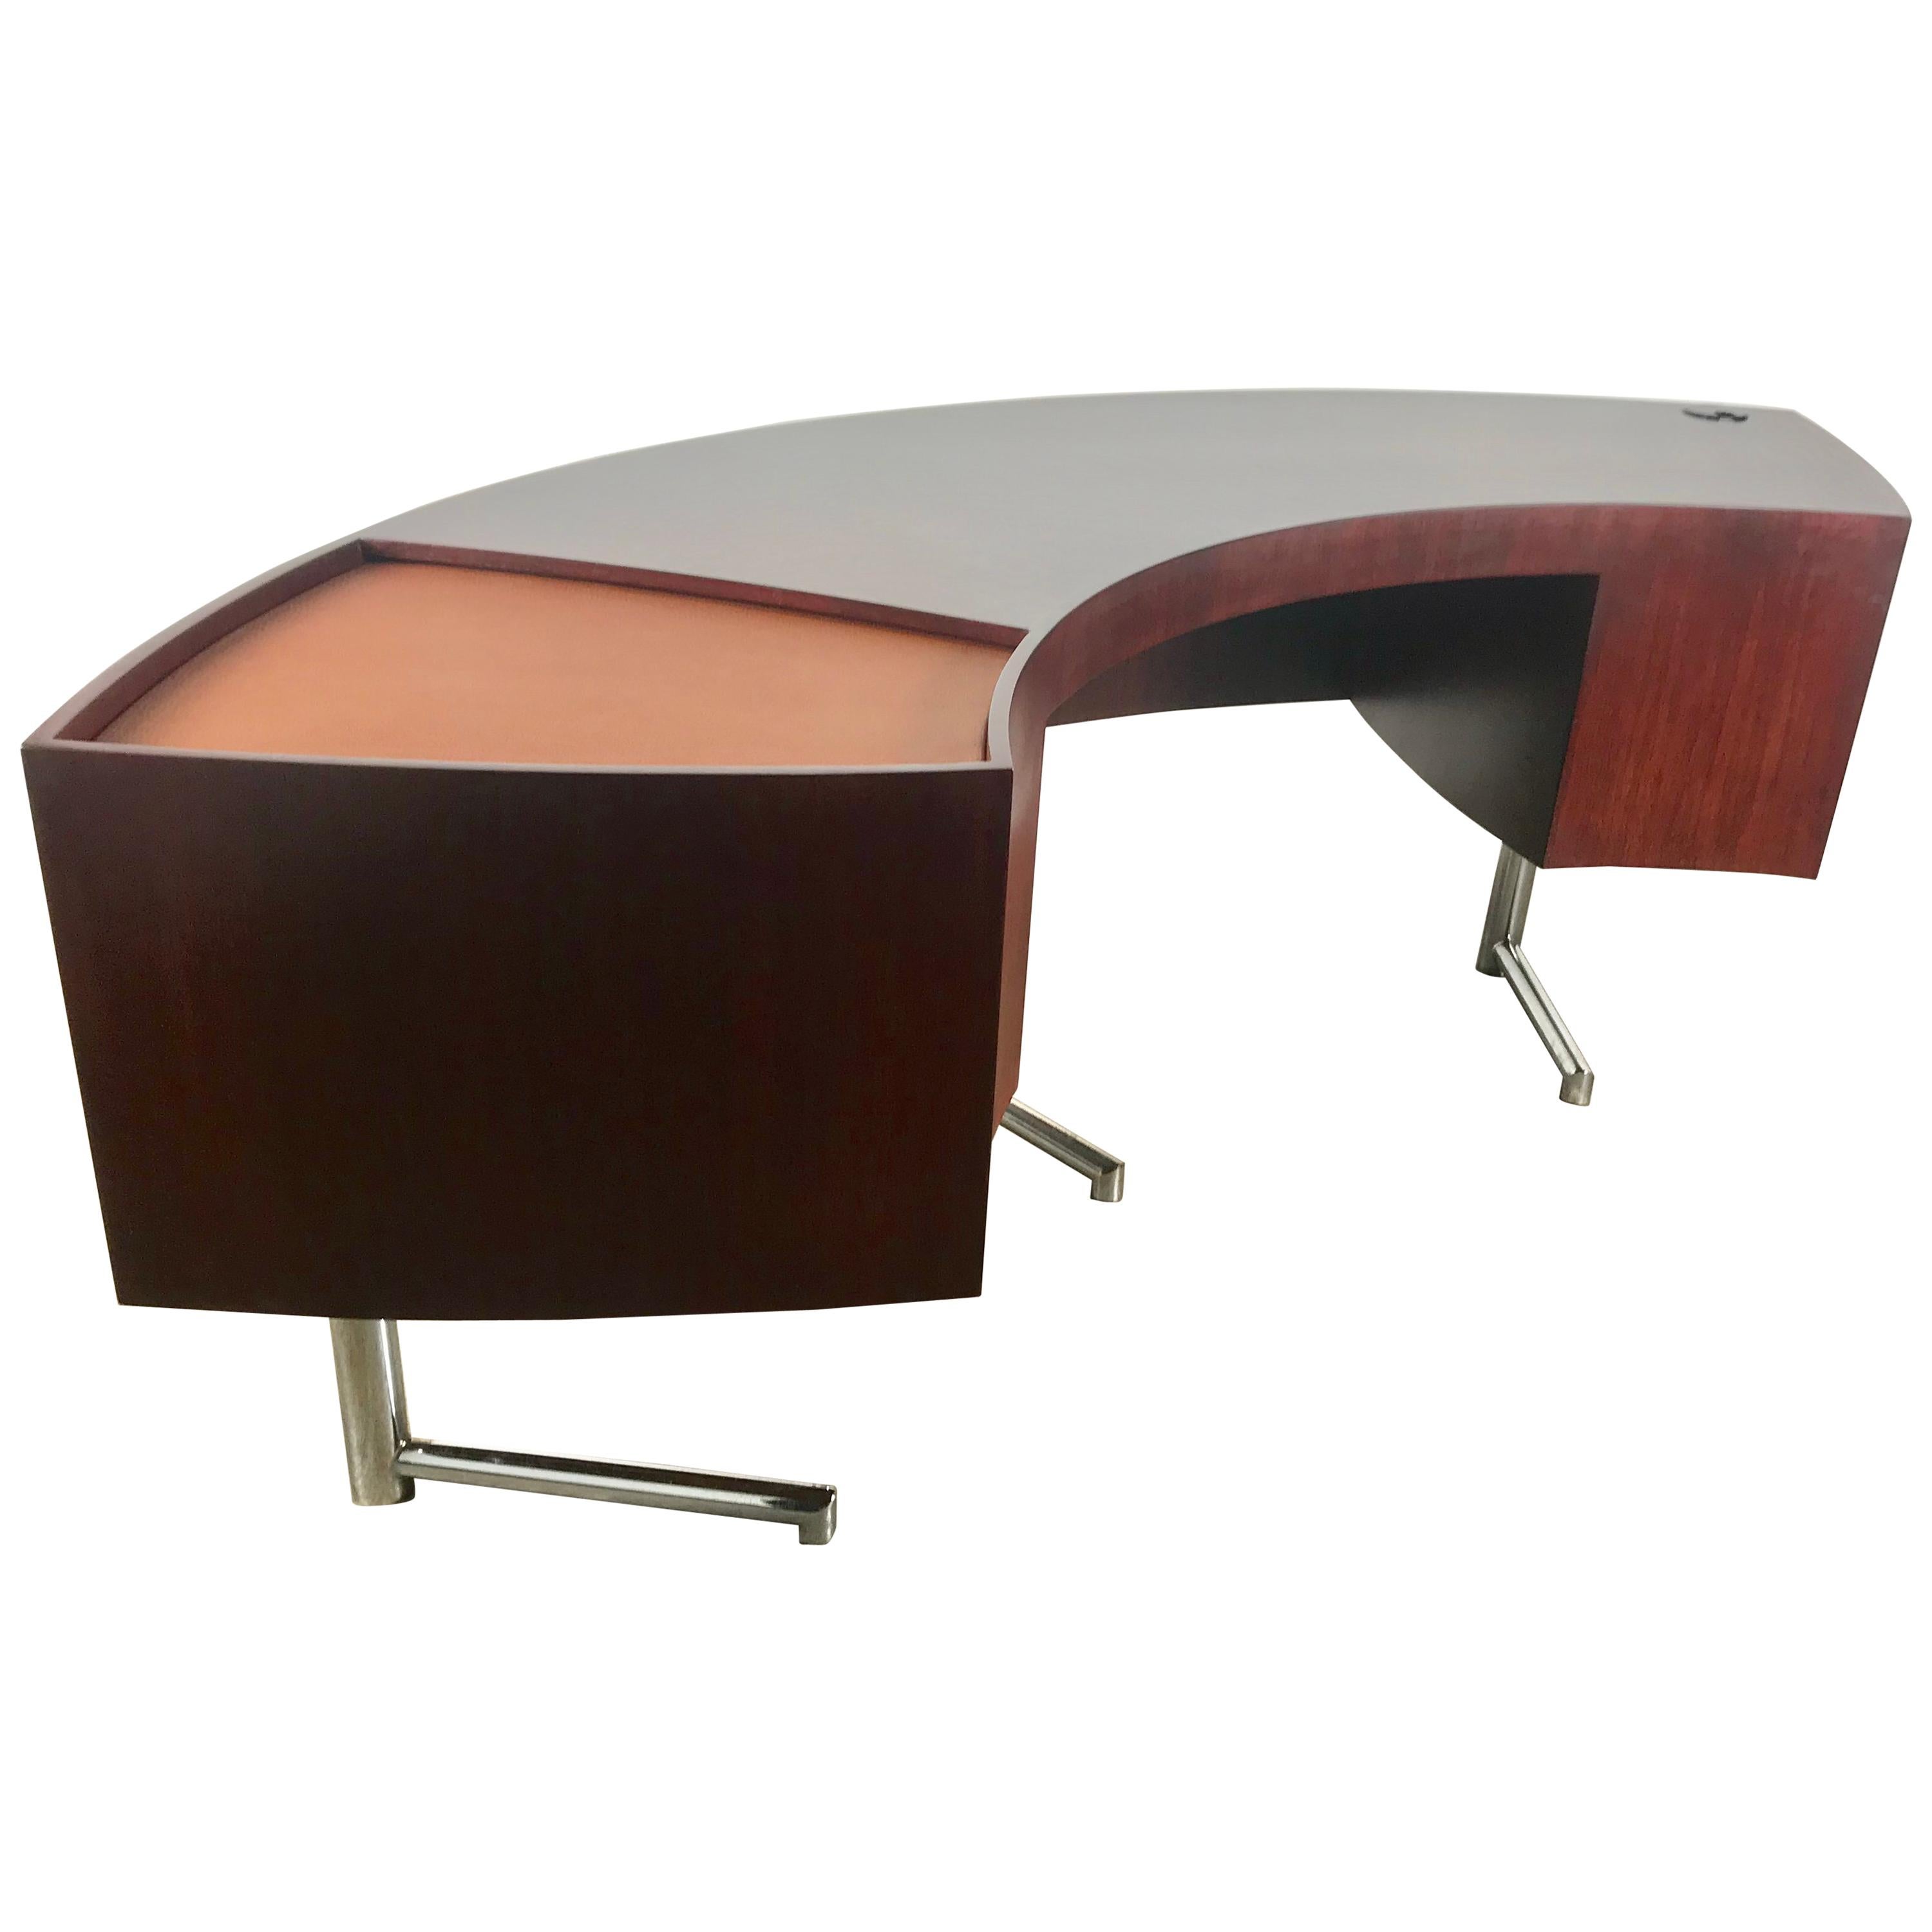 Rare Curved Desk on Chrome-Plated Base, Designed by Leif Jacobsen